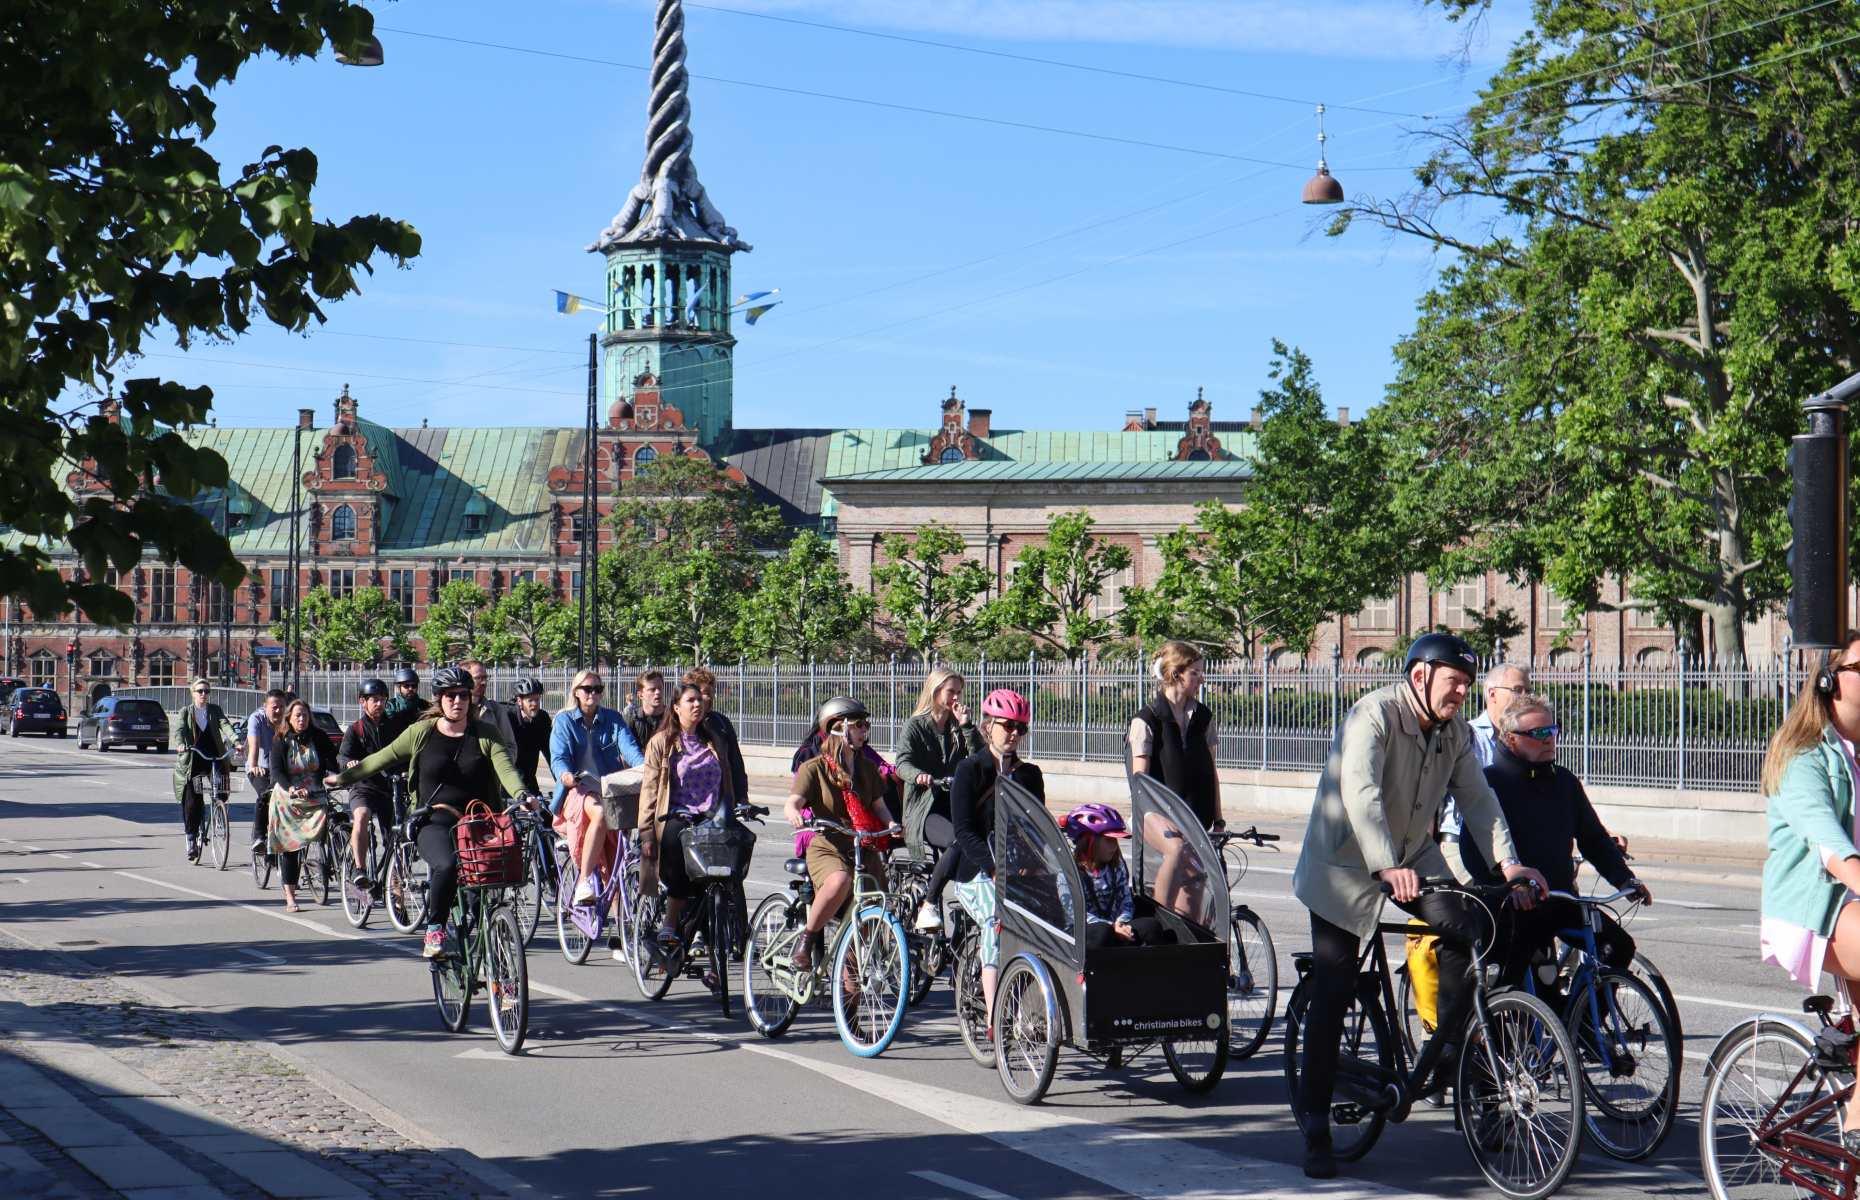 <p>While the Dutch capital might be the poster-child for seeing the world on two wheels, it's not the only European city encouraging people to get on their bikes. Copenhagen (pictured) is another incredibly cycle-friendly city, where great bike bridges, explorative routes, designated lanes, and hire schemes have all been created.</p>  <p>If you are planning to cycle when you come to Europe, make sure to familiarise yourself with the road laws for cyclists in each of your destinations, as these can vary from country to country.</p>